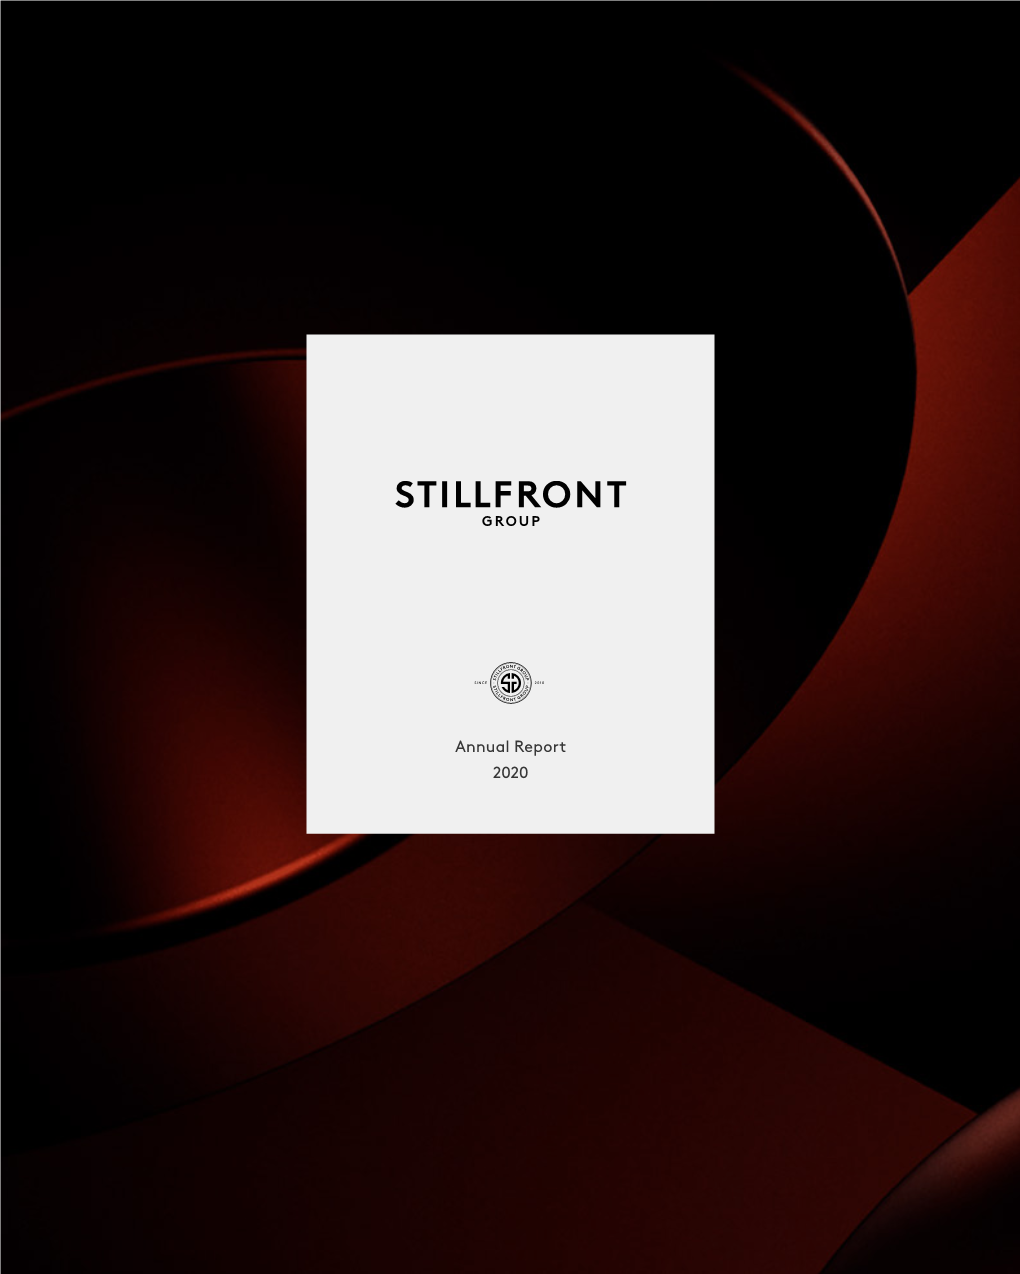 Annual Report 2020 STILLFRONT GROUP Contents